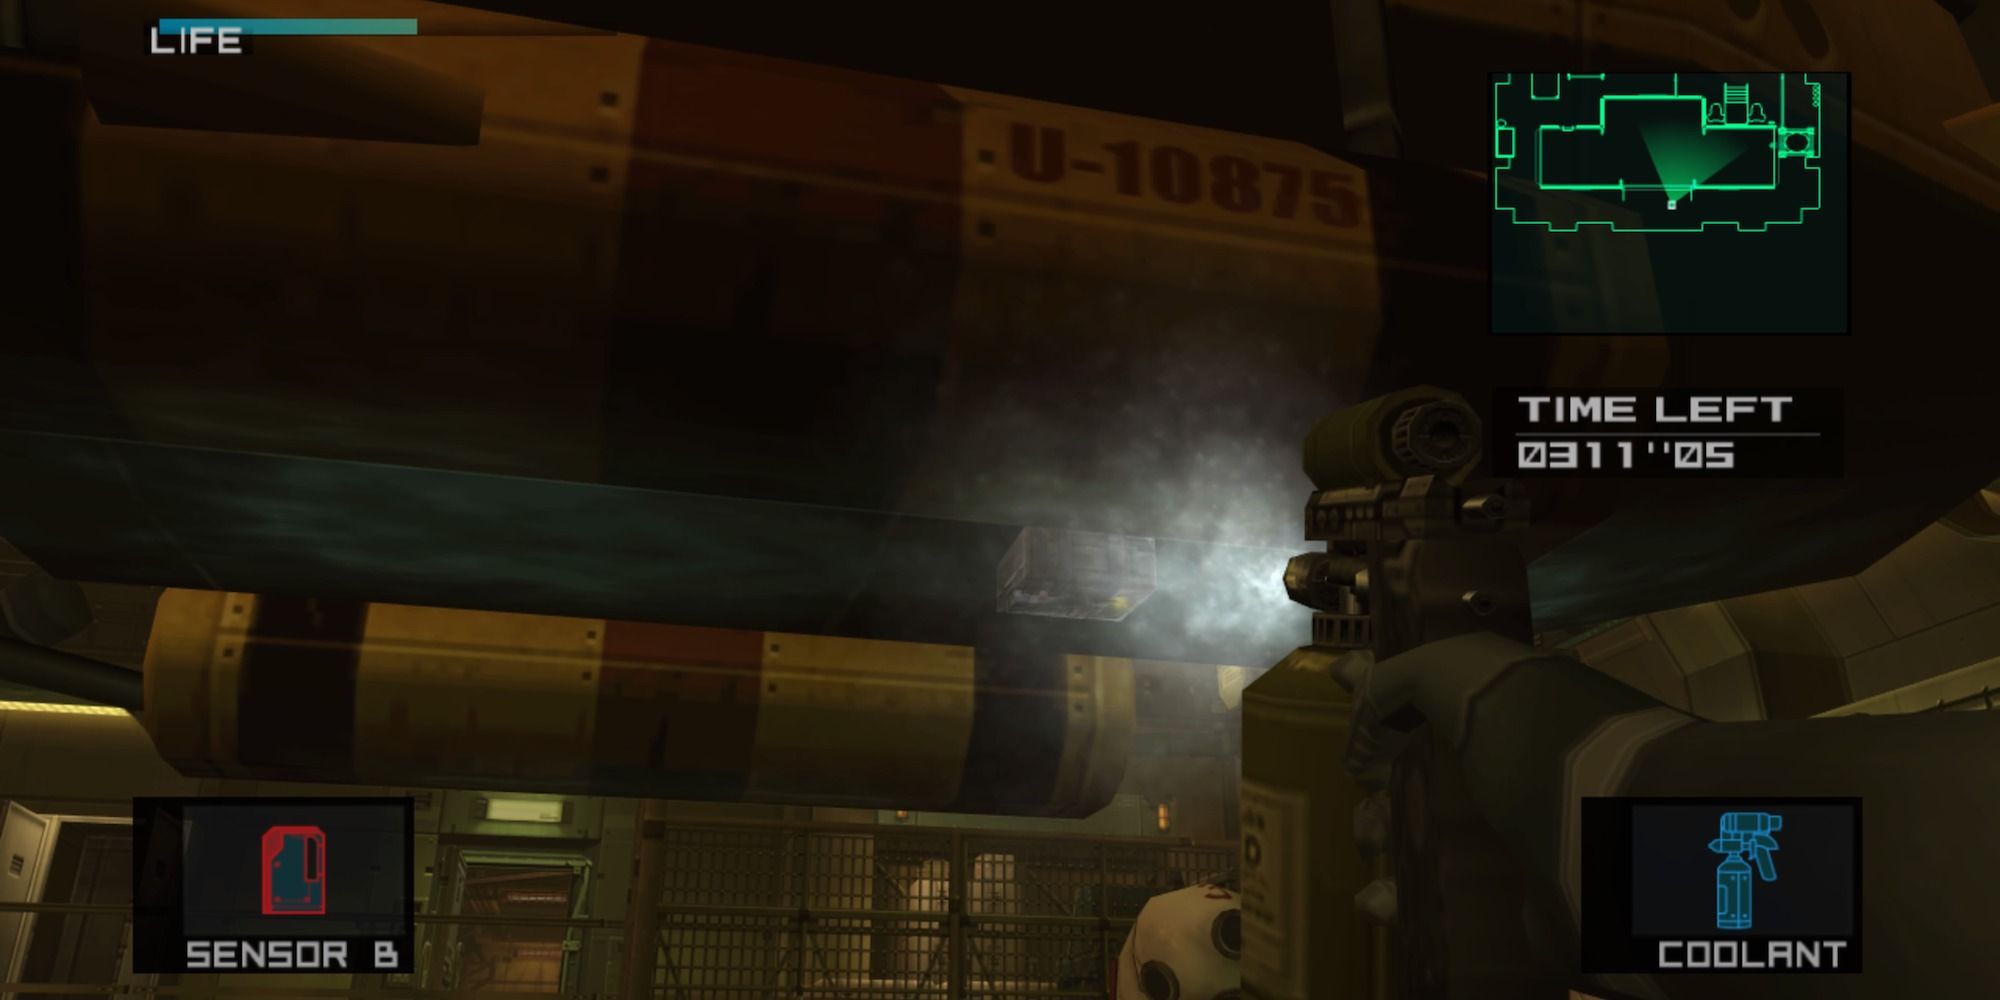 Raiden looking at Bomb in Strut A with coolant in hand